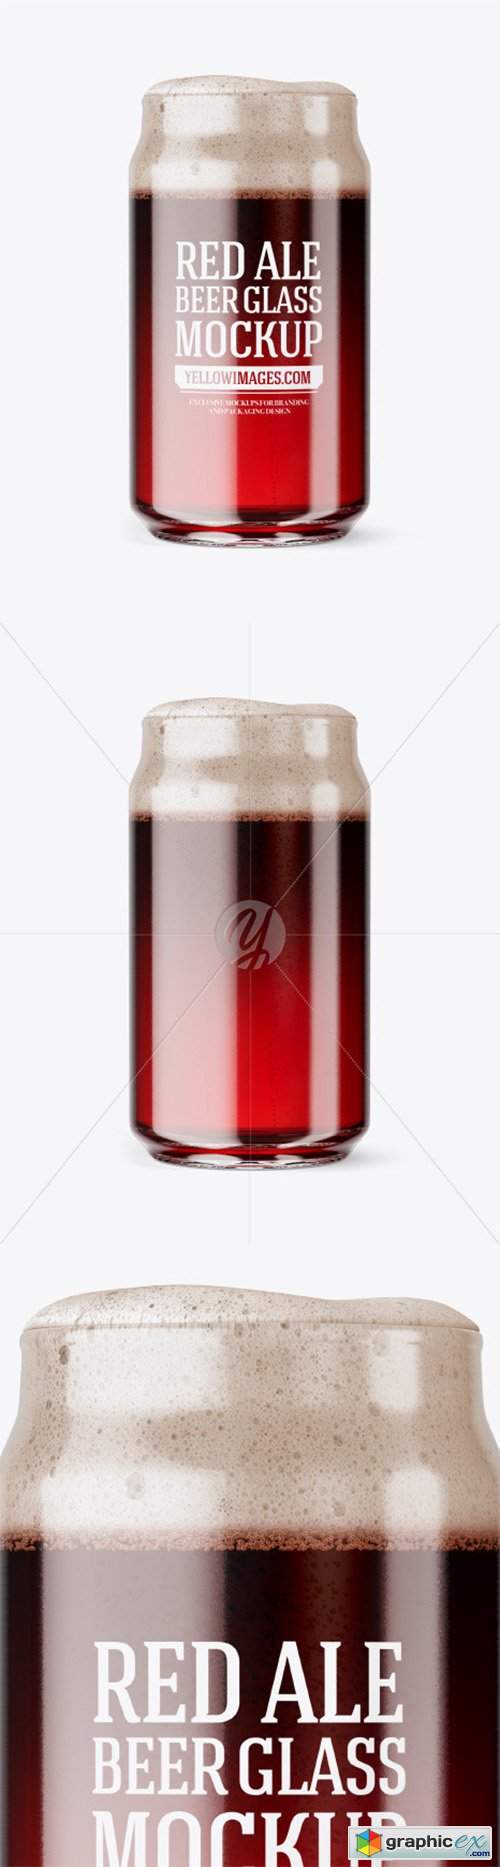  Can Shaped Glass Cup w/ Red Ale Mockup 